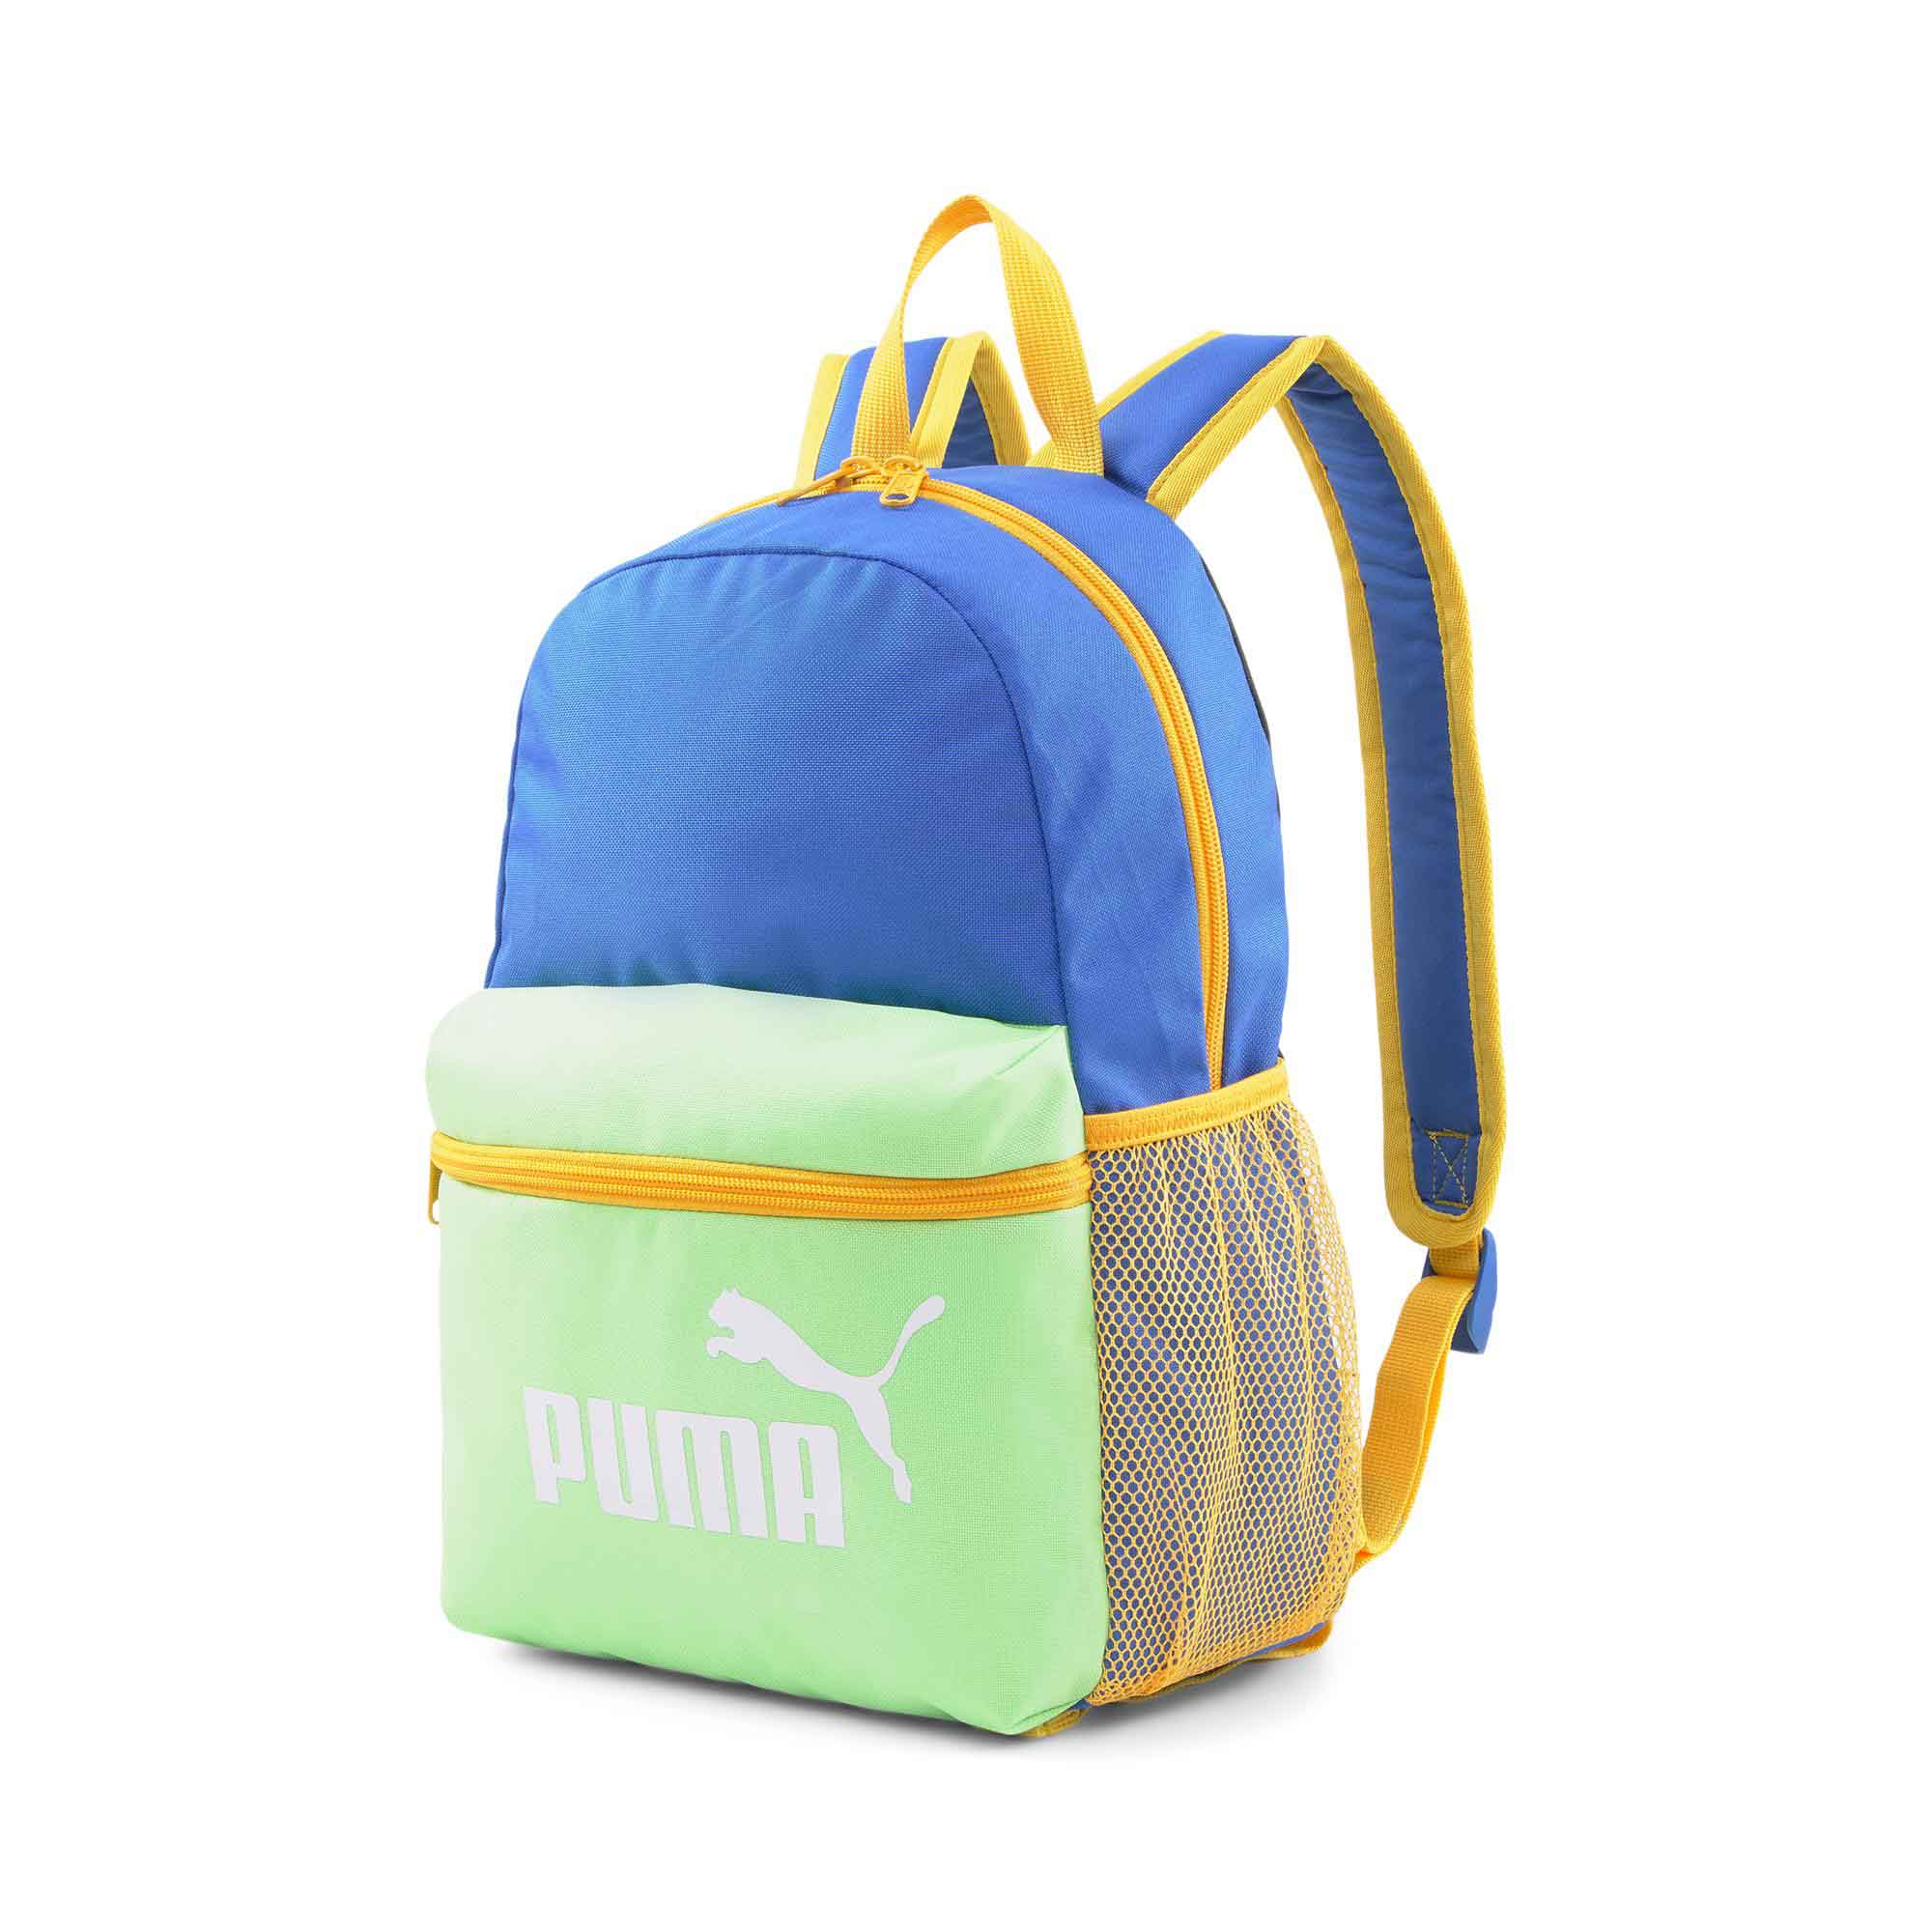 Puma Phase Small Backpack Blue 13L